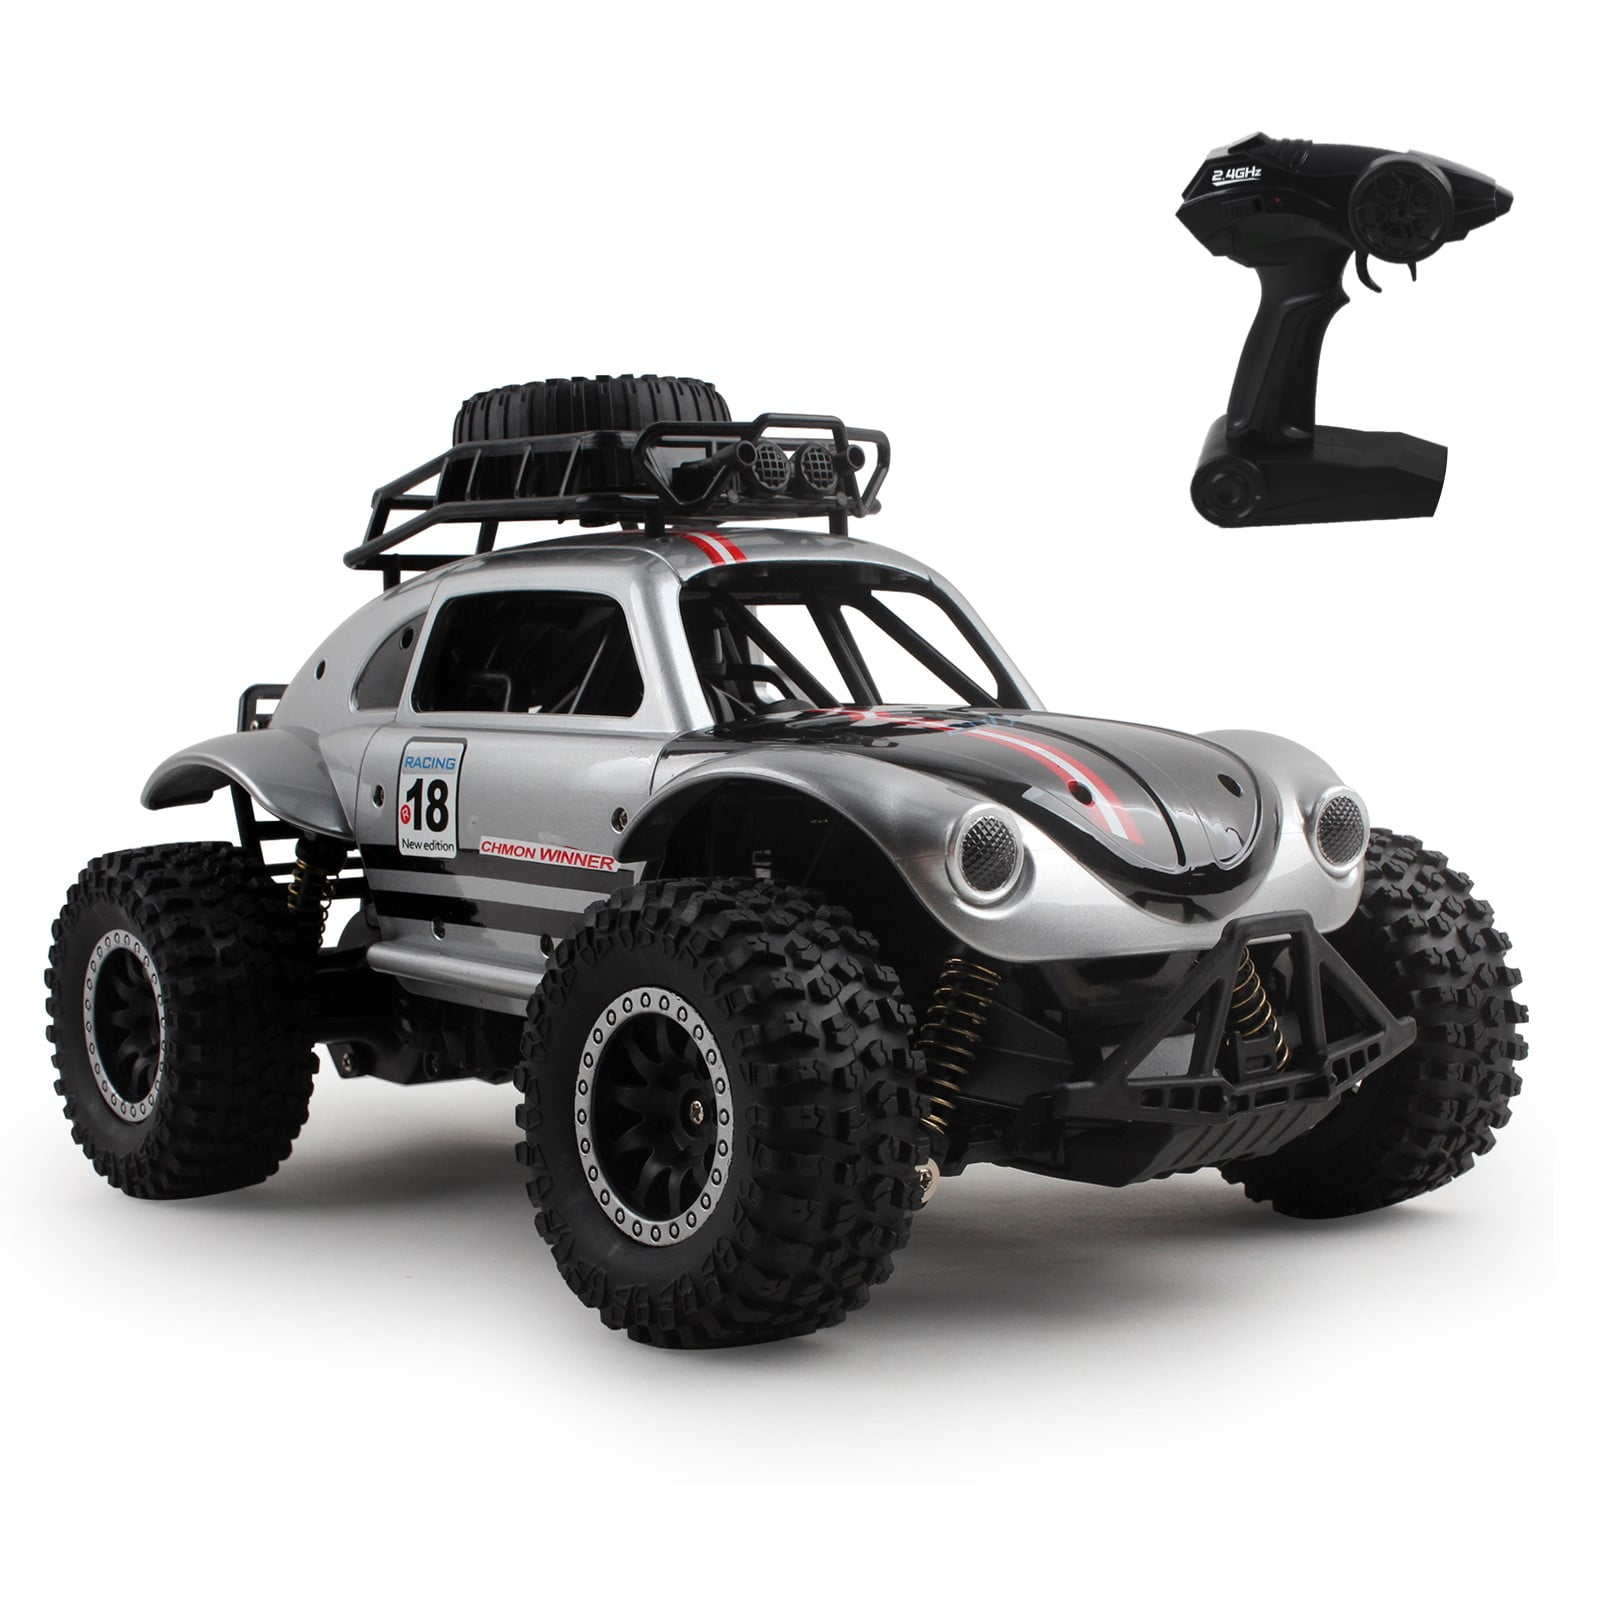 NEW Drift Speed Remote Control Truck RC Off-road Vehicle Kids Car Toy Gifts 2018 